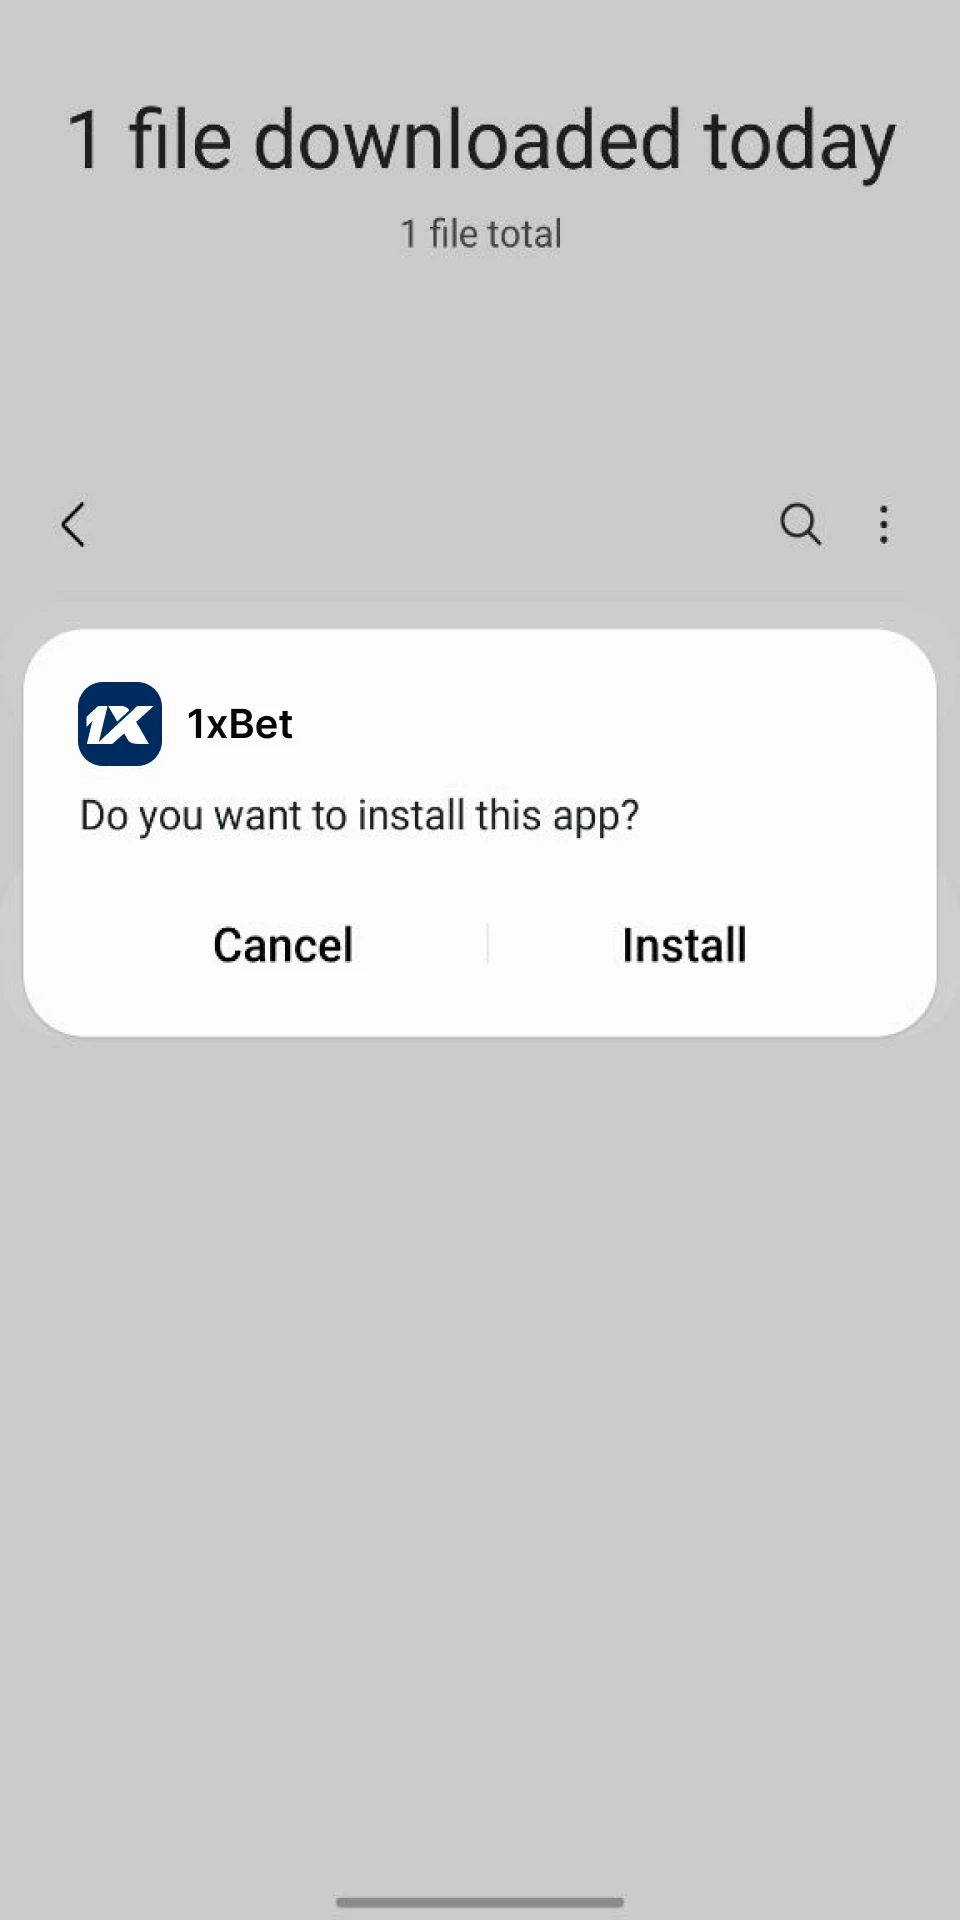 Open the 1xBet apk file to install it on your Android device.